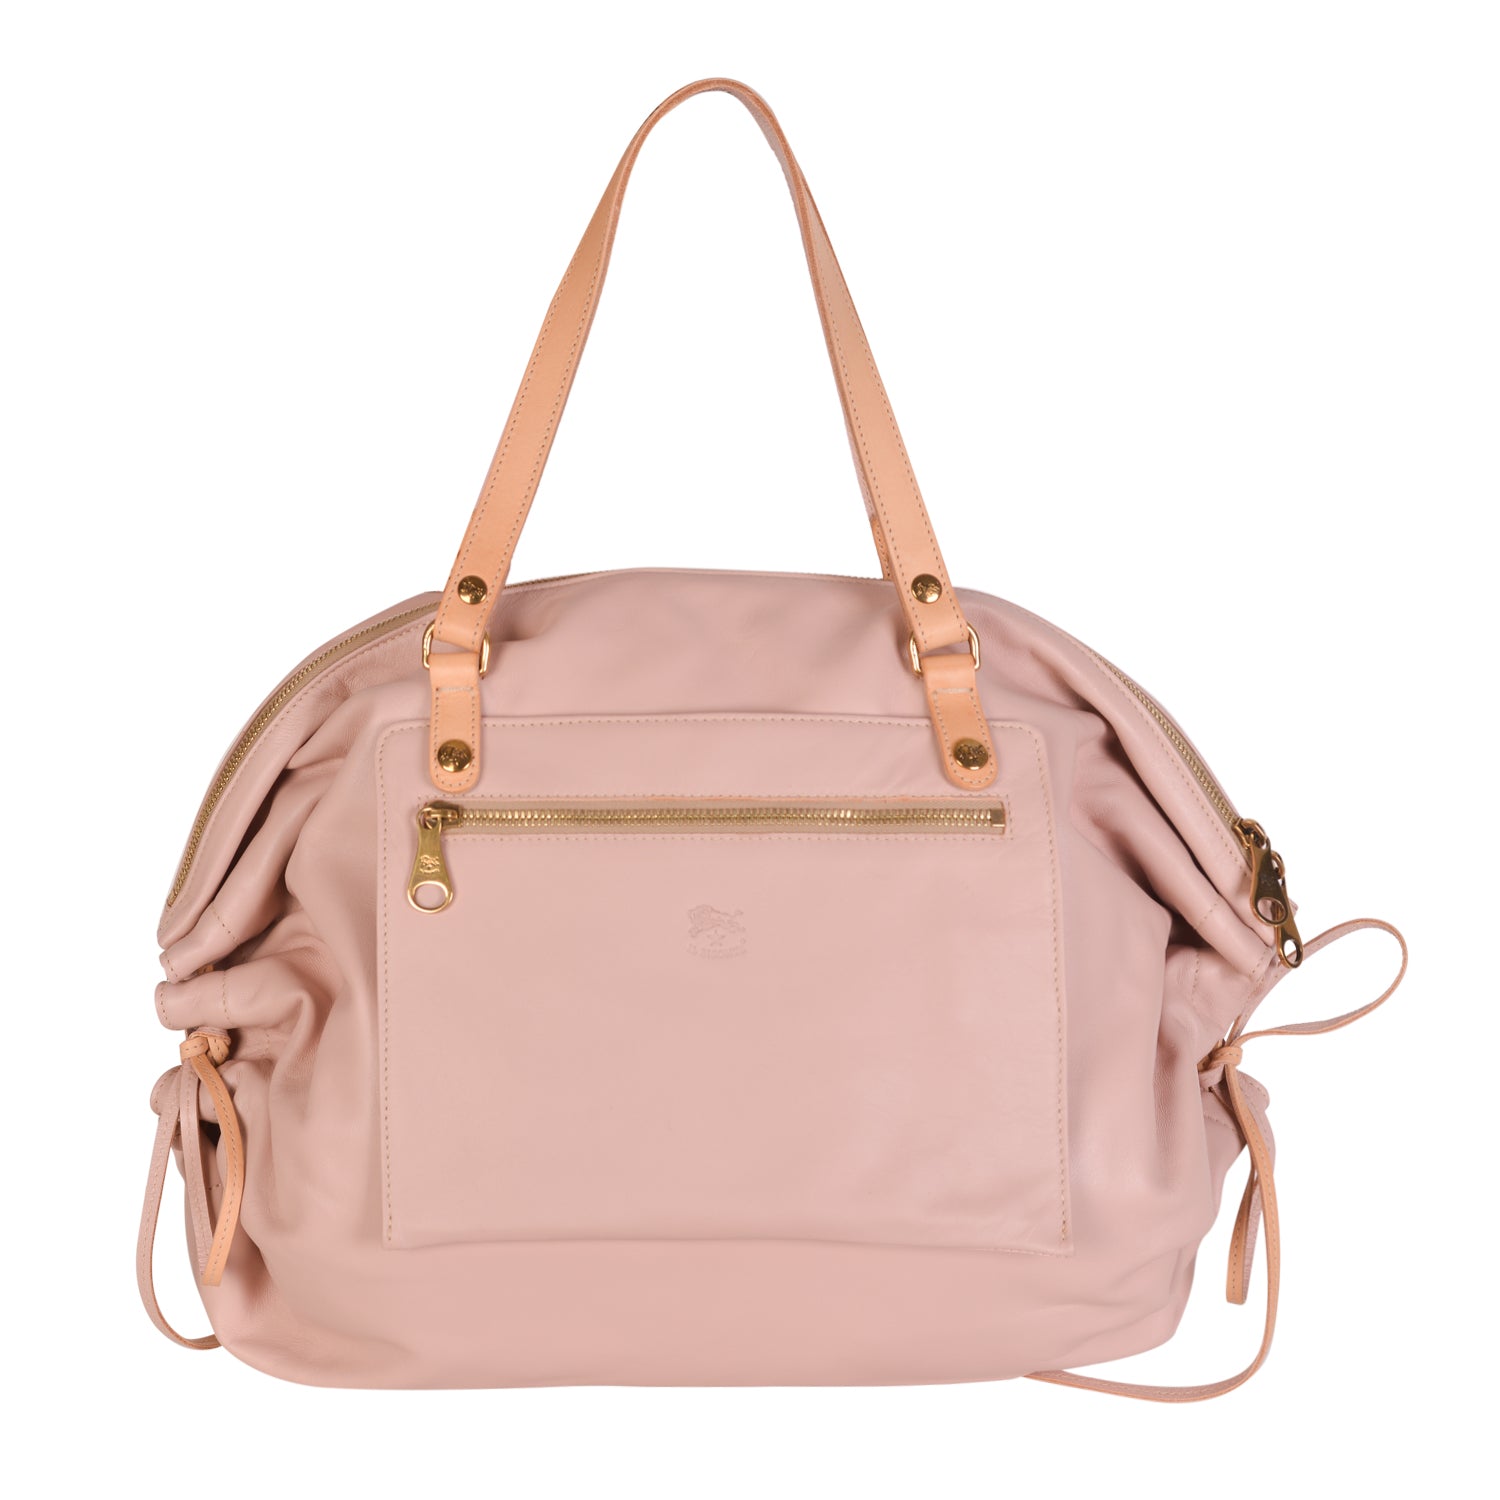 NEW IL BISONTE WOMEN'S CANDY COLLECTION SHOULDER BAG IN ROSE LEATHER